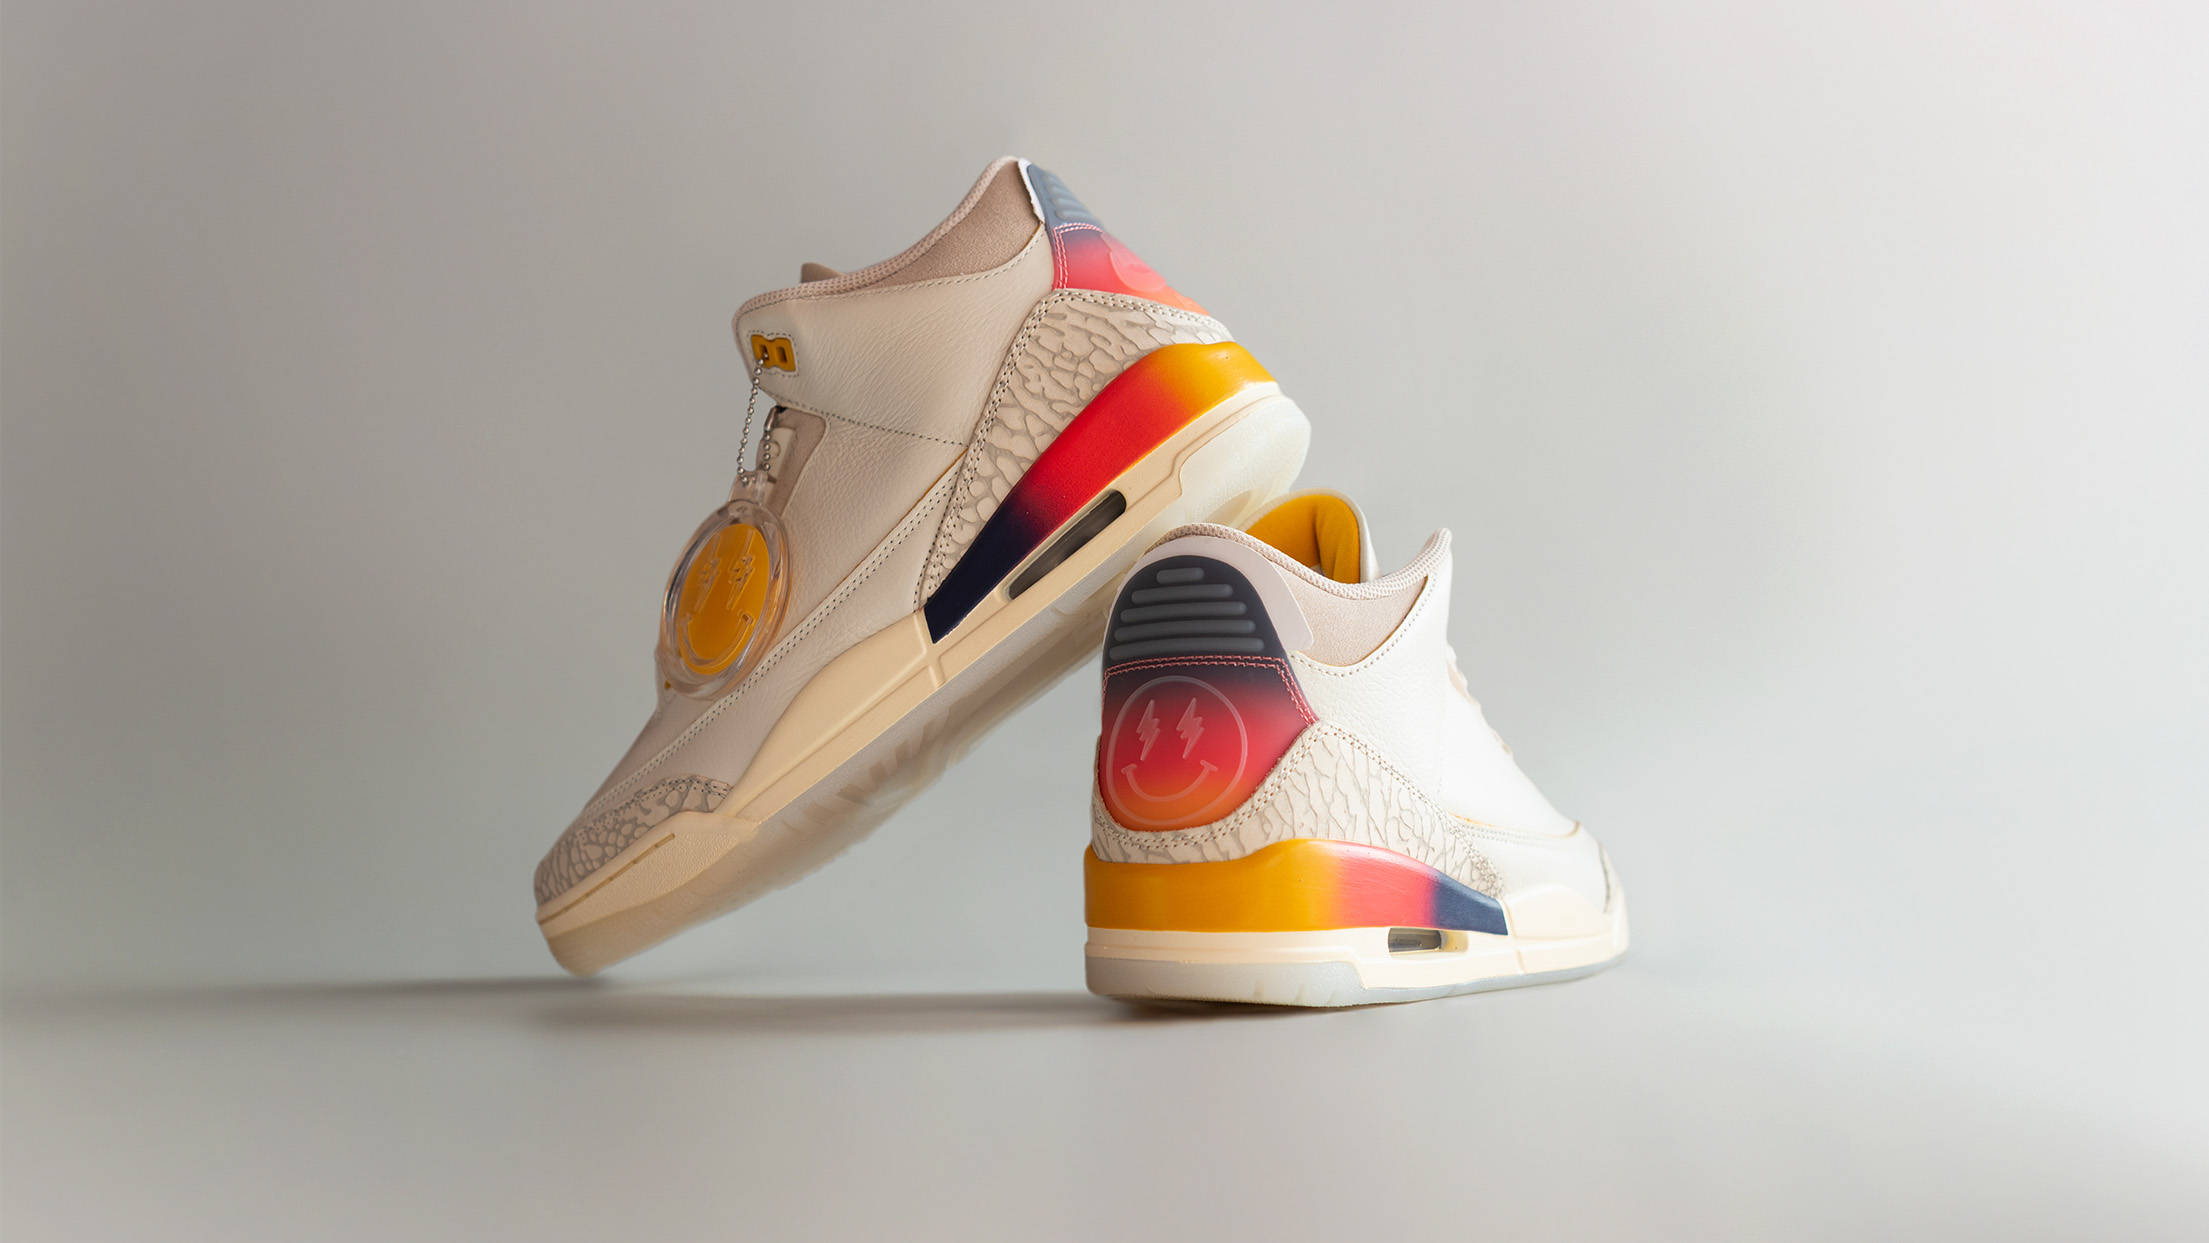 How to Cop the J Balvin x Air Jordan 3 "Medellín Sunset" | The Sole Supplier